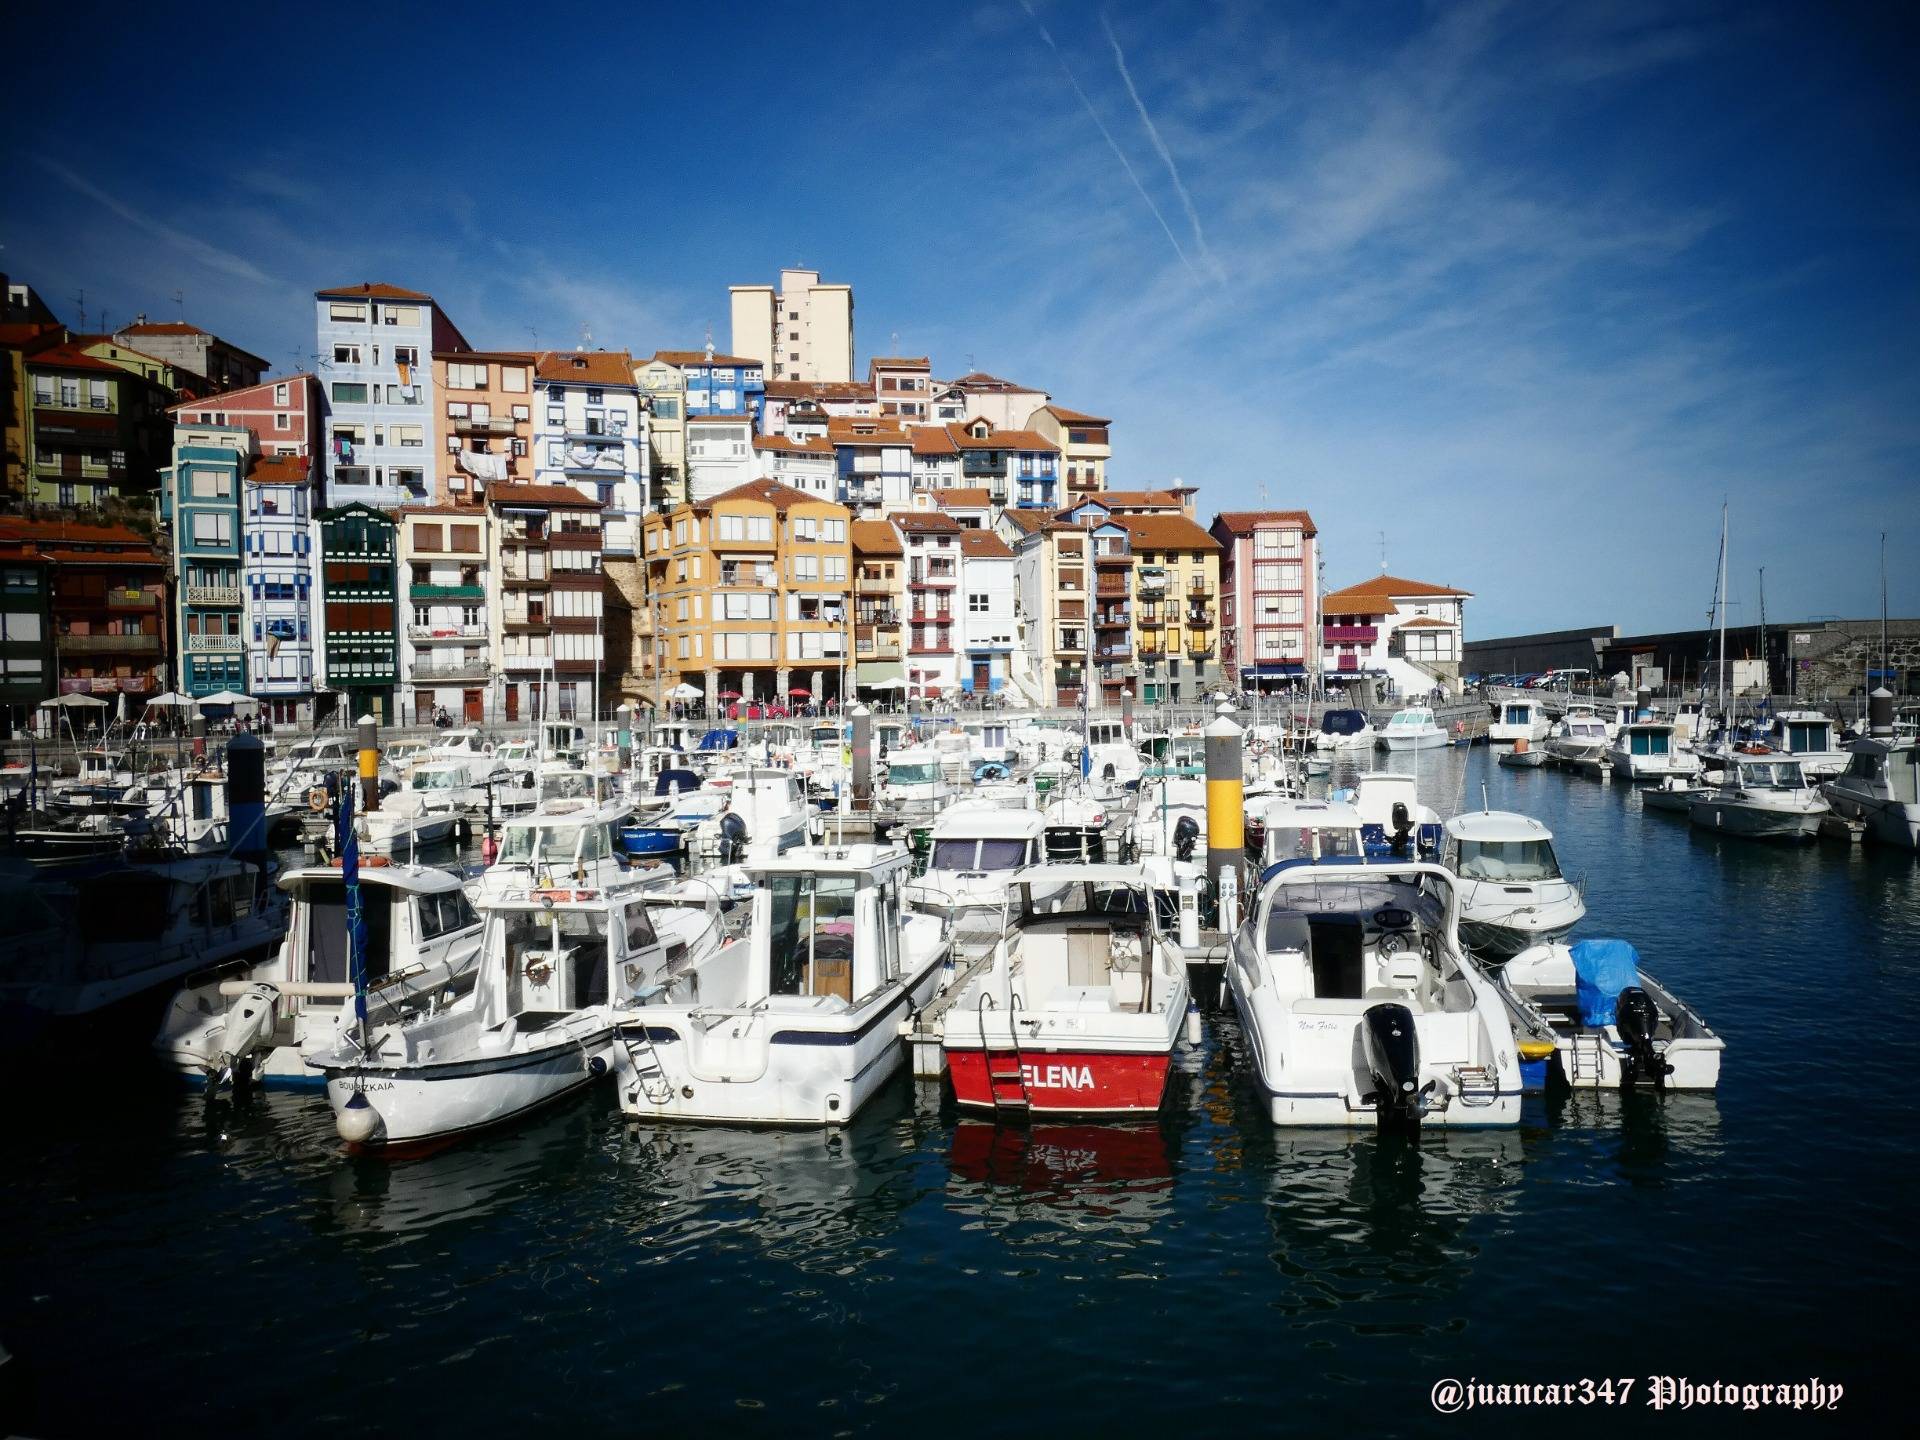 On the Bay of Biscay: Bermeo